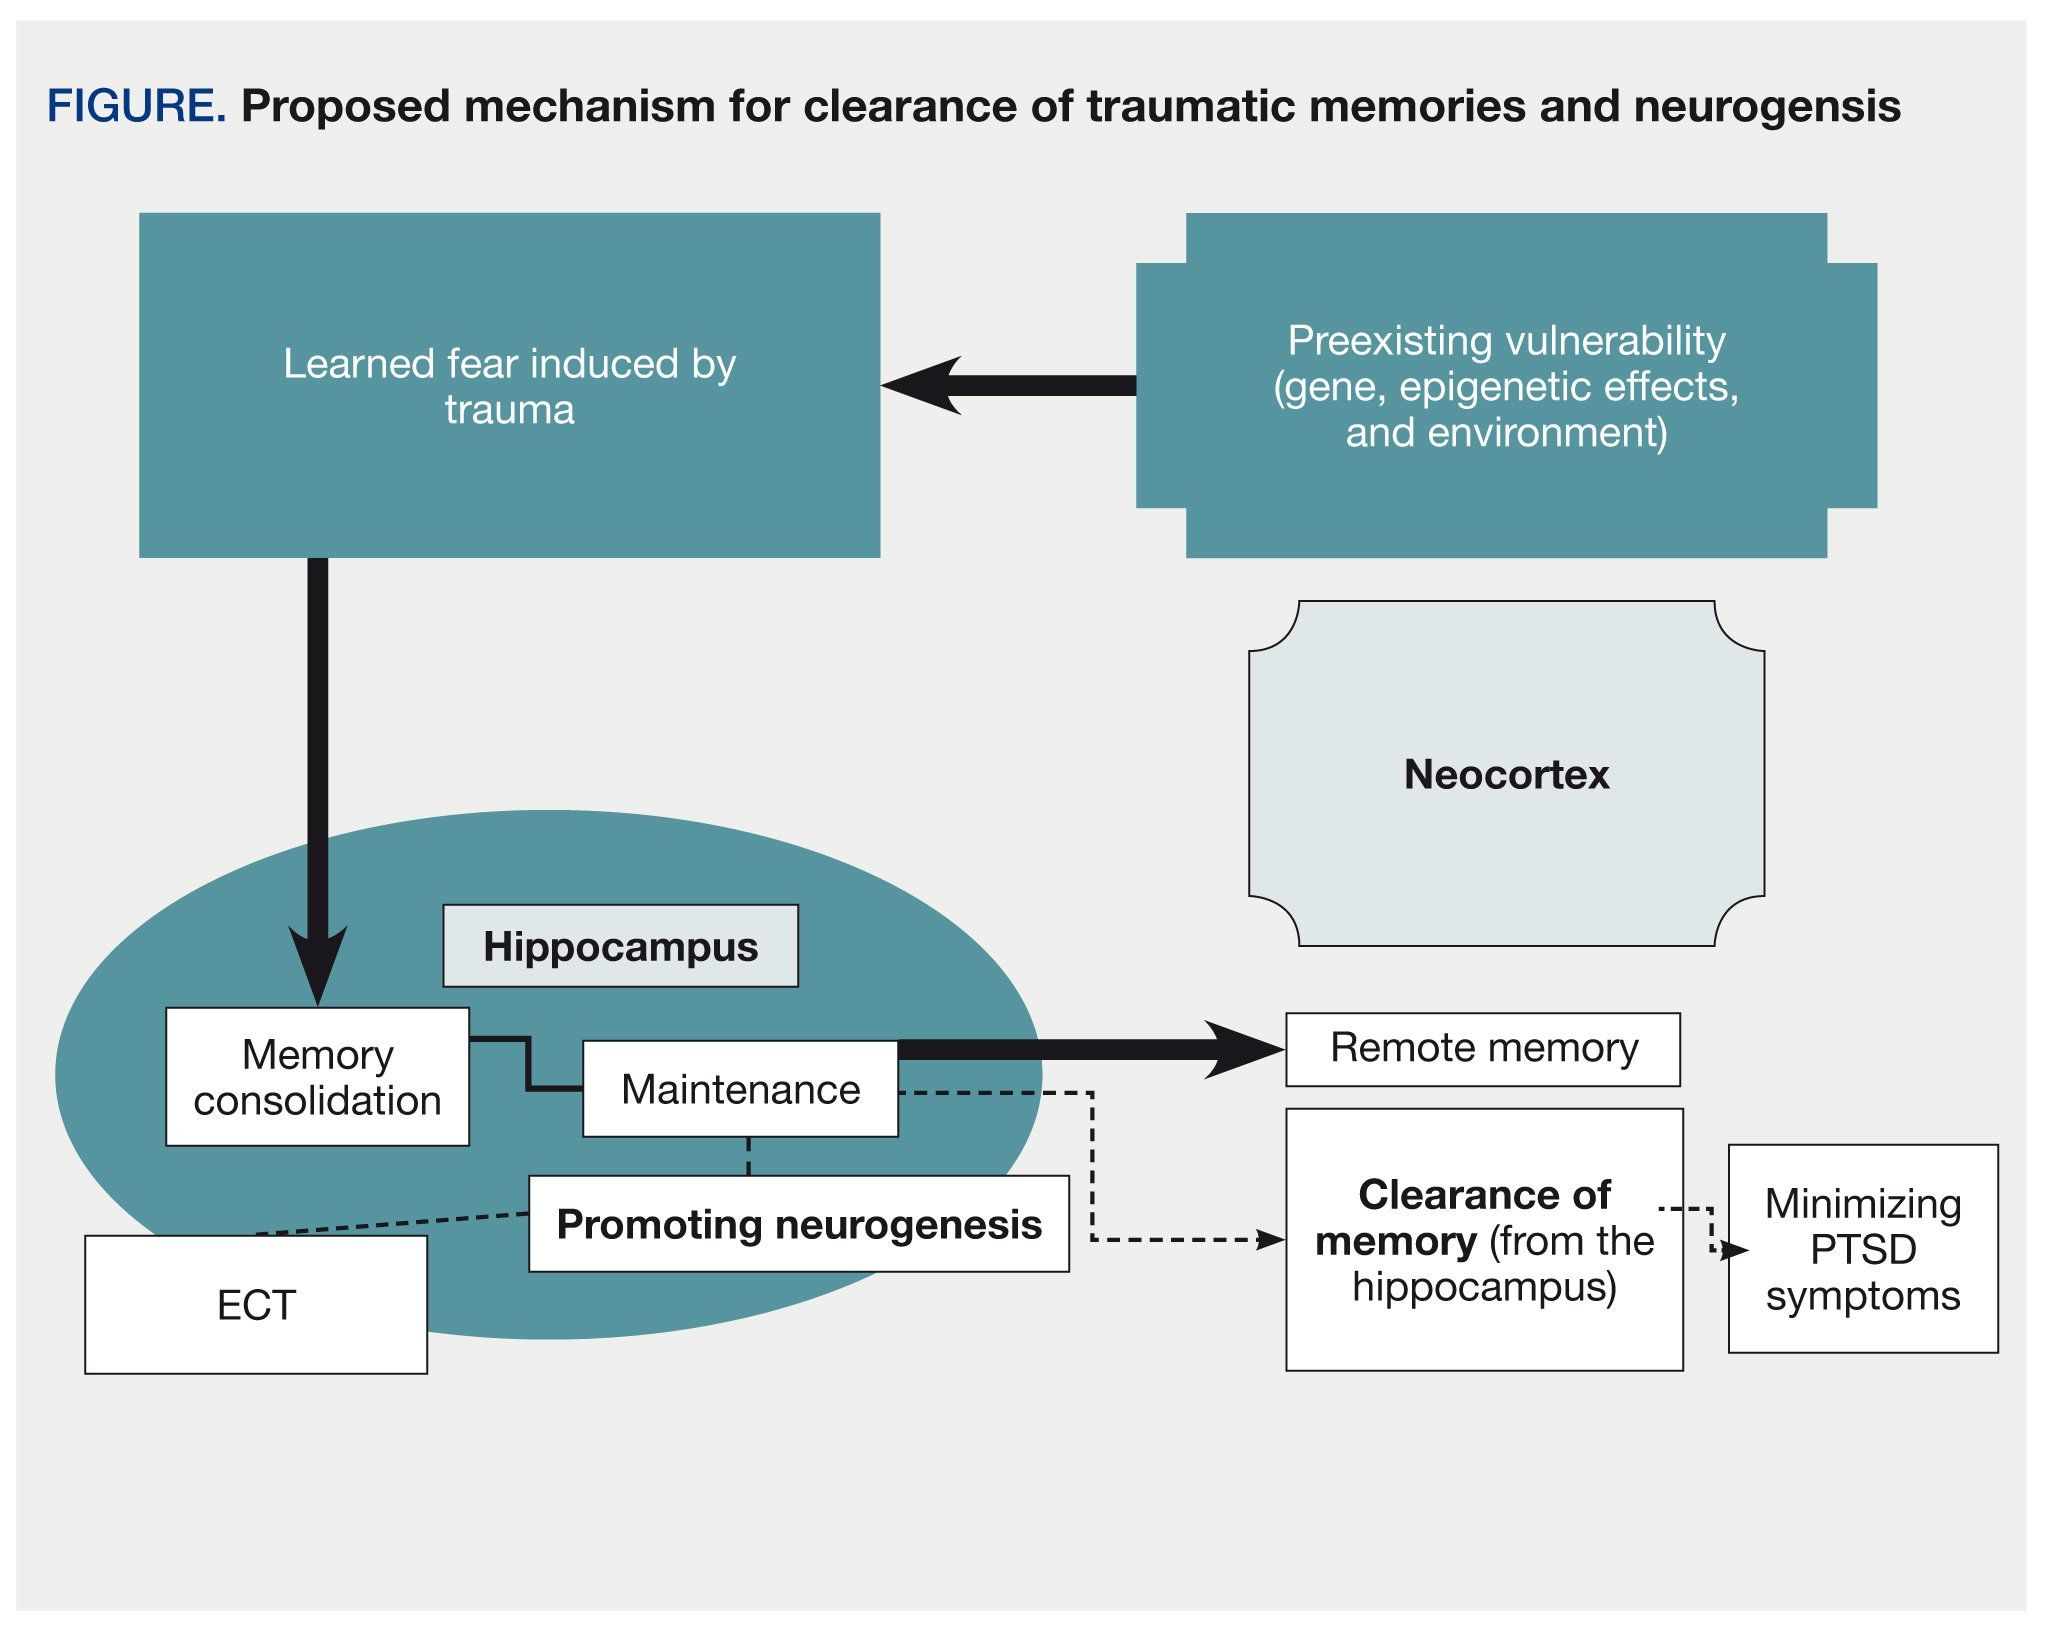 Proposed mechanism for clearance of traumatic memories and neurogensis